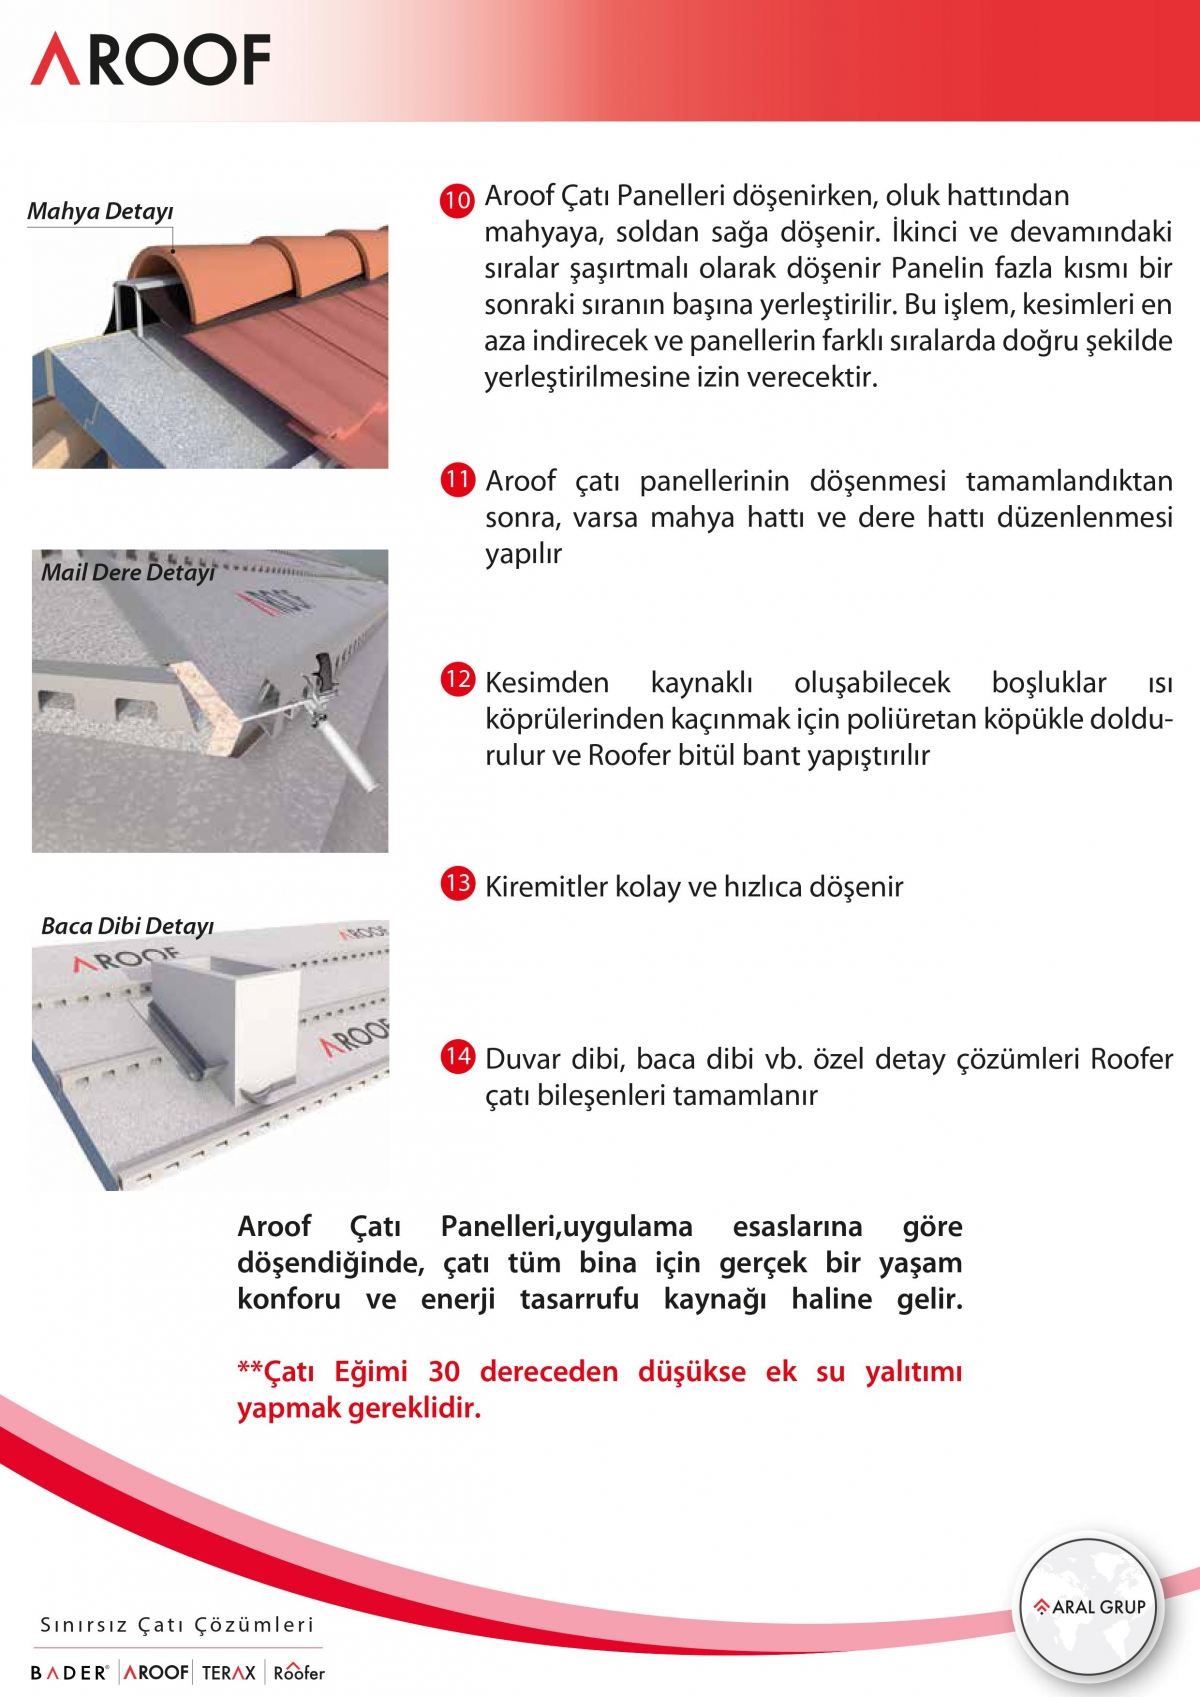 Office701 | AROOF | Roofing Catalog Design